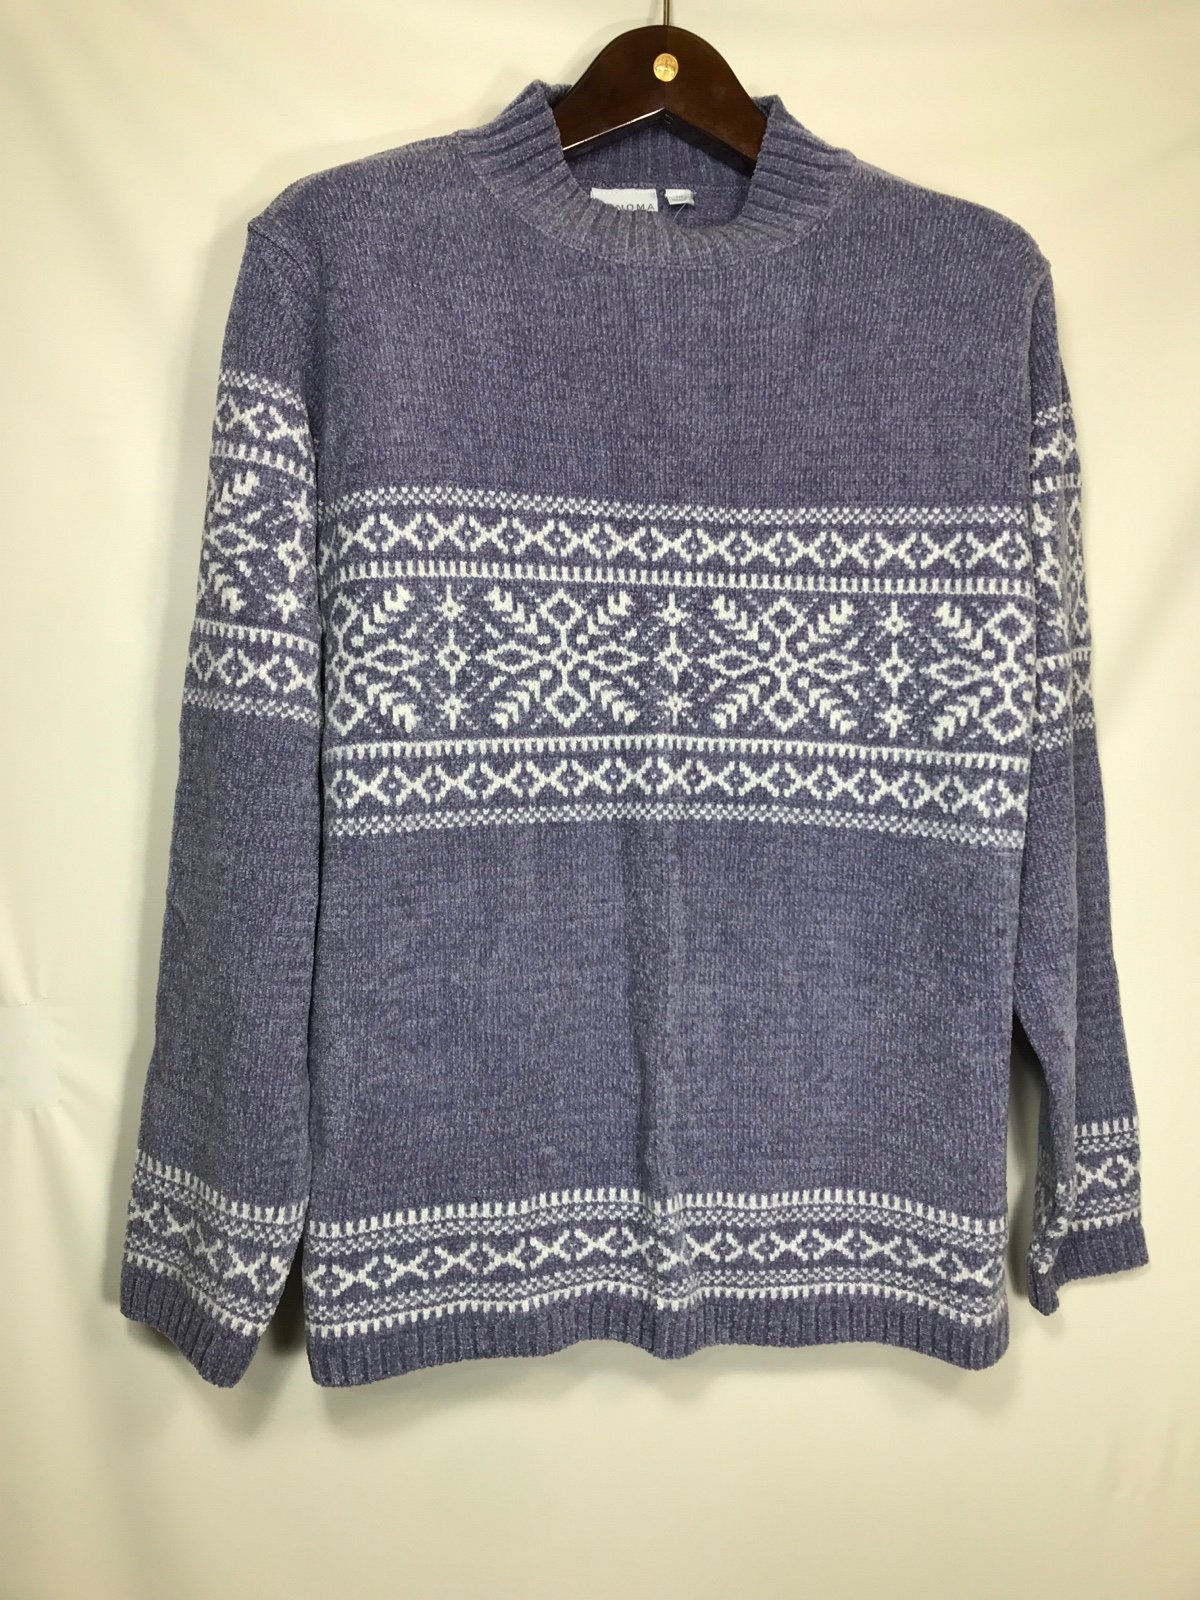 Special offer  SONOMA life+style Womens Sweater size 1X